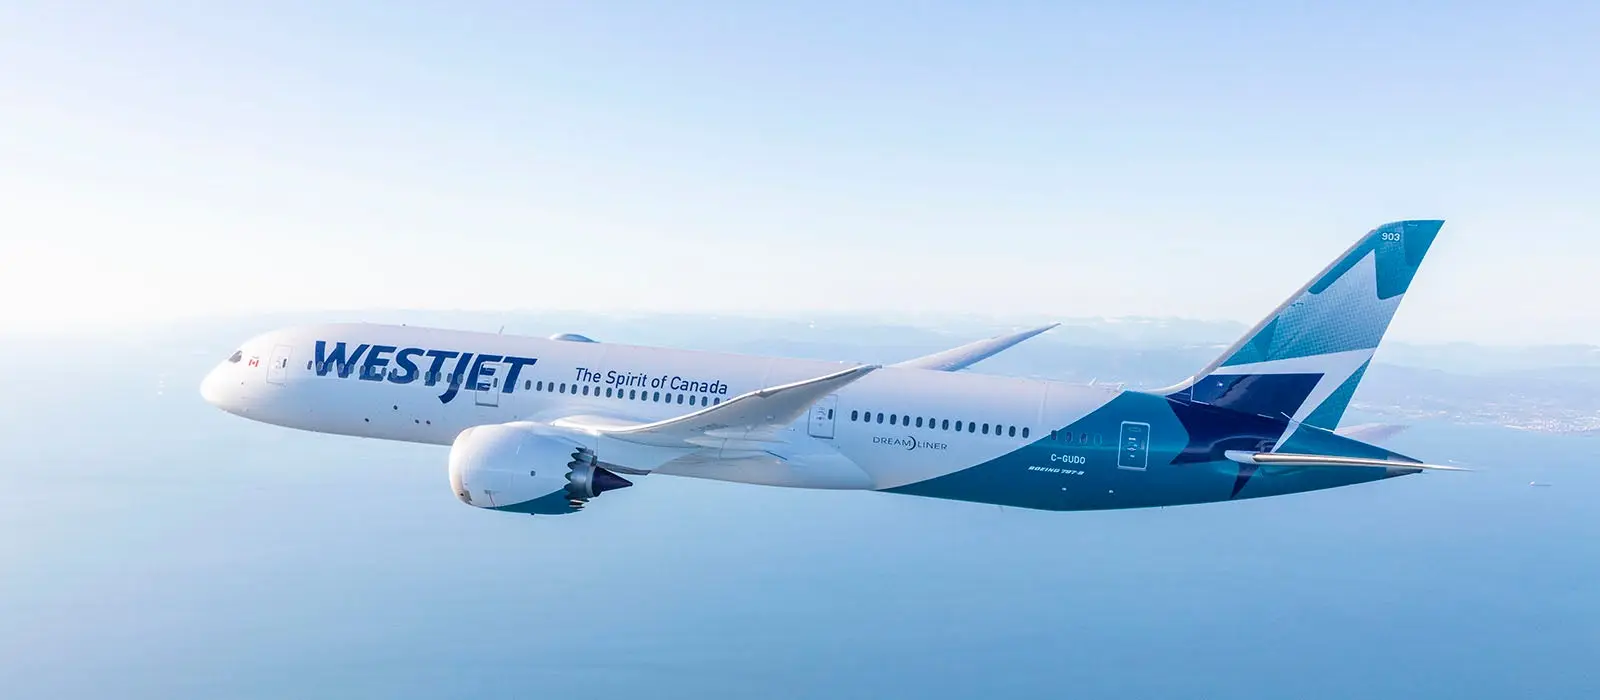 WestJet Boeing 787-9 Dreamliner photographed on March 5, 2018 by Chad Slattery from Wolfe Air Learjet 25.